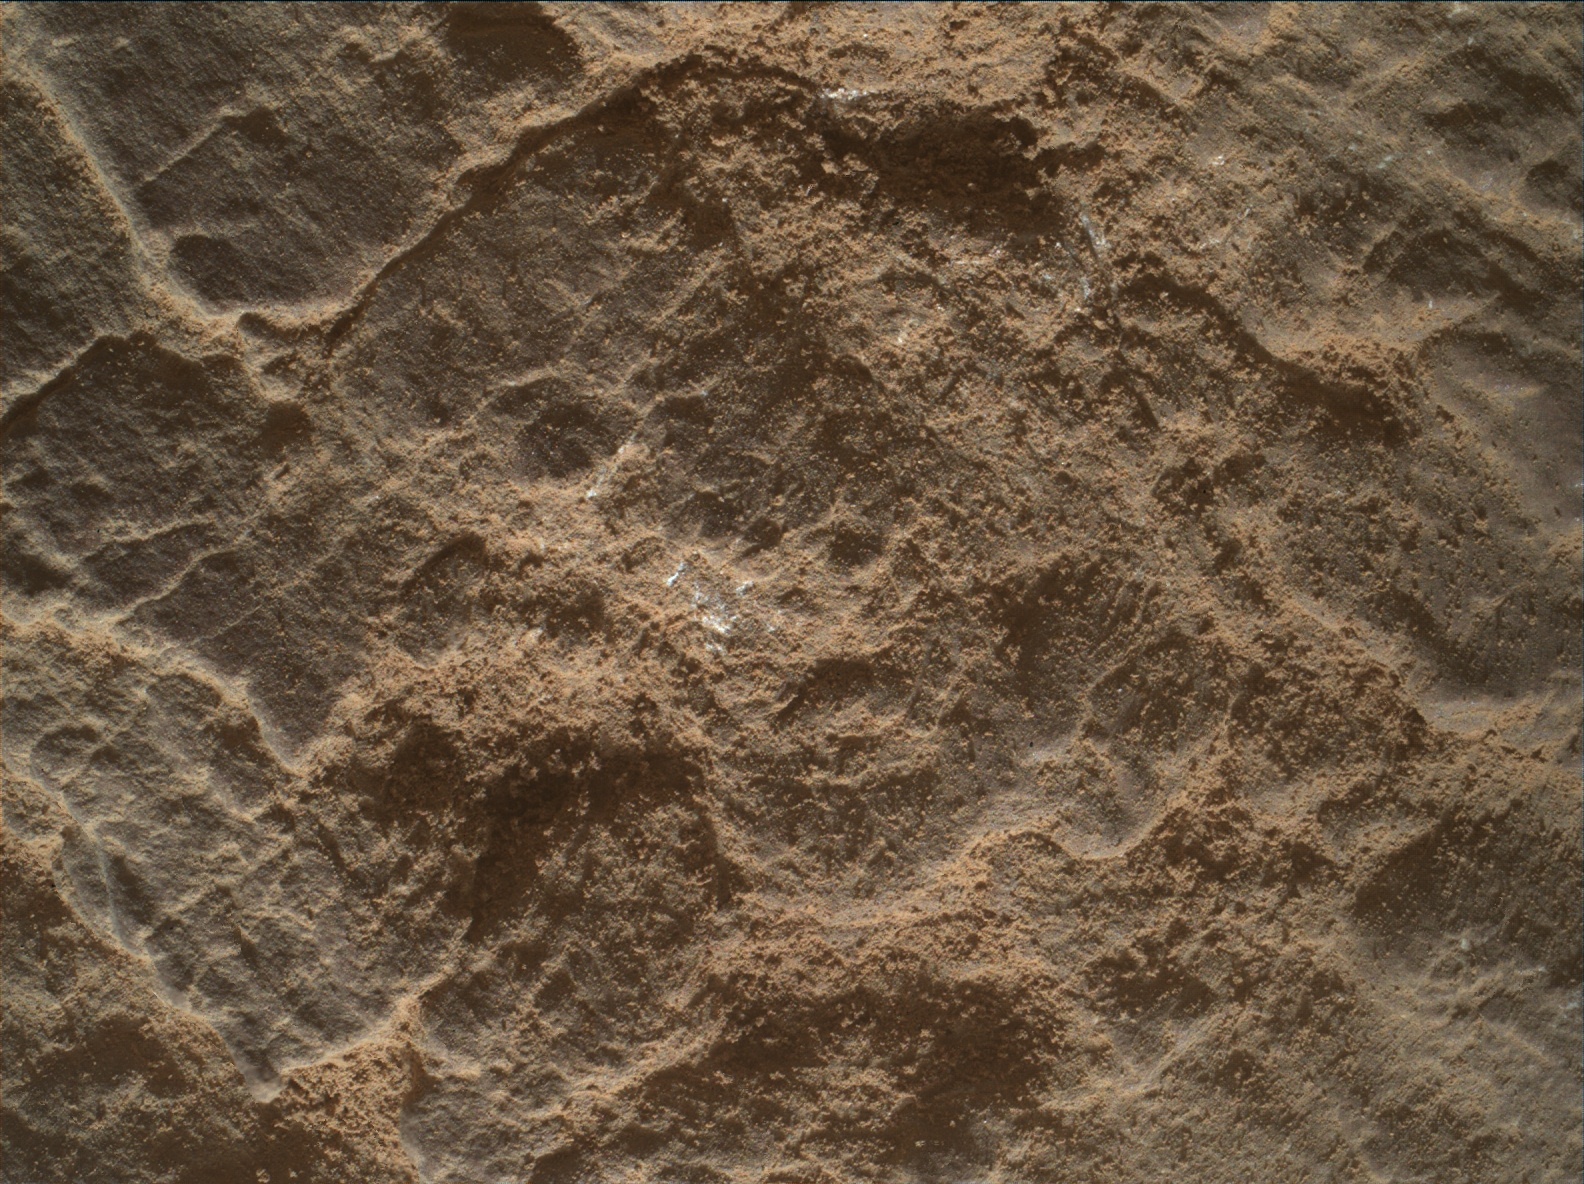 Nasa's Mars rover Curiosity acquired this image using its Mars Hand Lens Imager (MAHLI) on Sol 2484